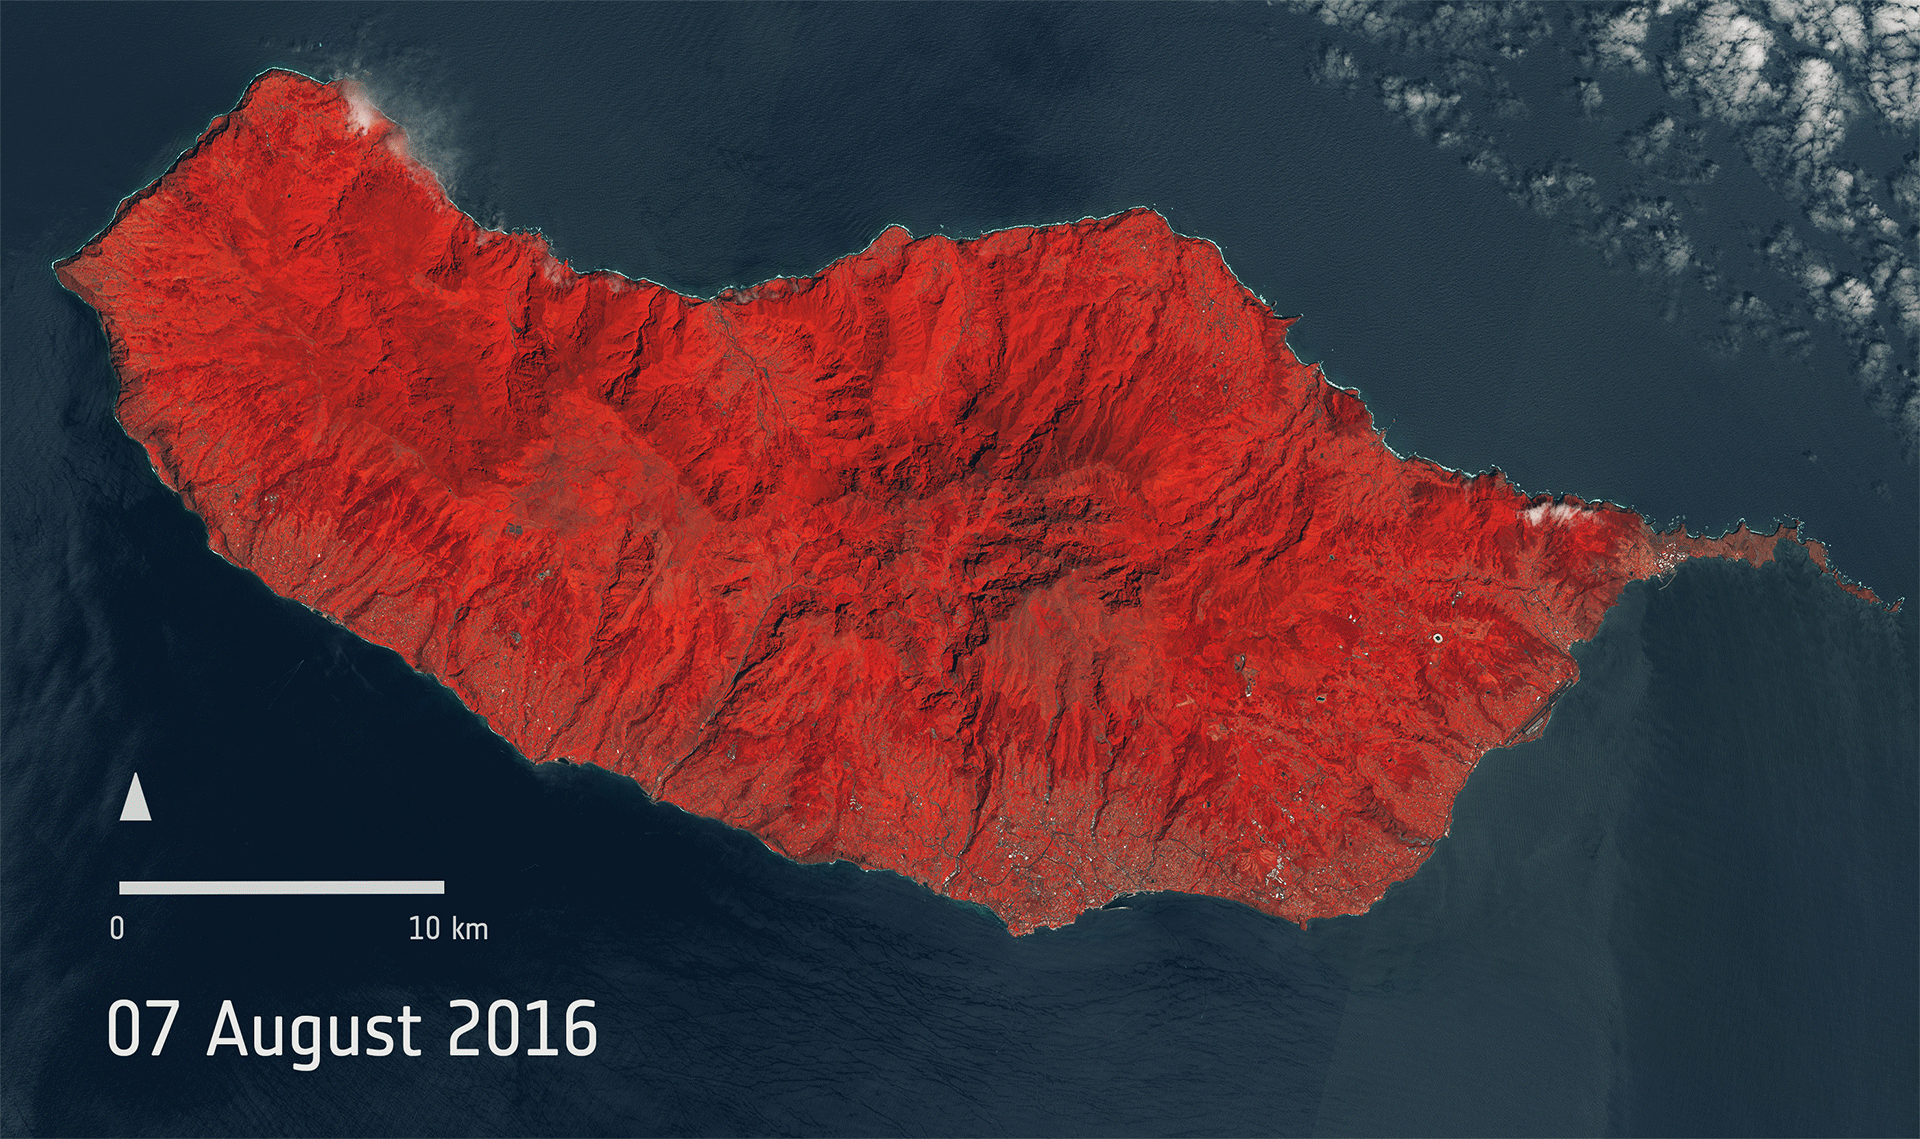 A typical example on how Copernicus Sentinel Data is being used: These two images from ESA's Sentinel-2A satellite show the beautiful Portuguese main island of Madeira before and after it was devastated by wildfires in August 2016.